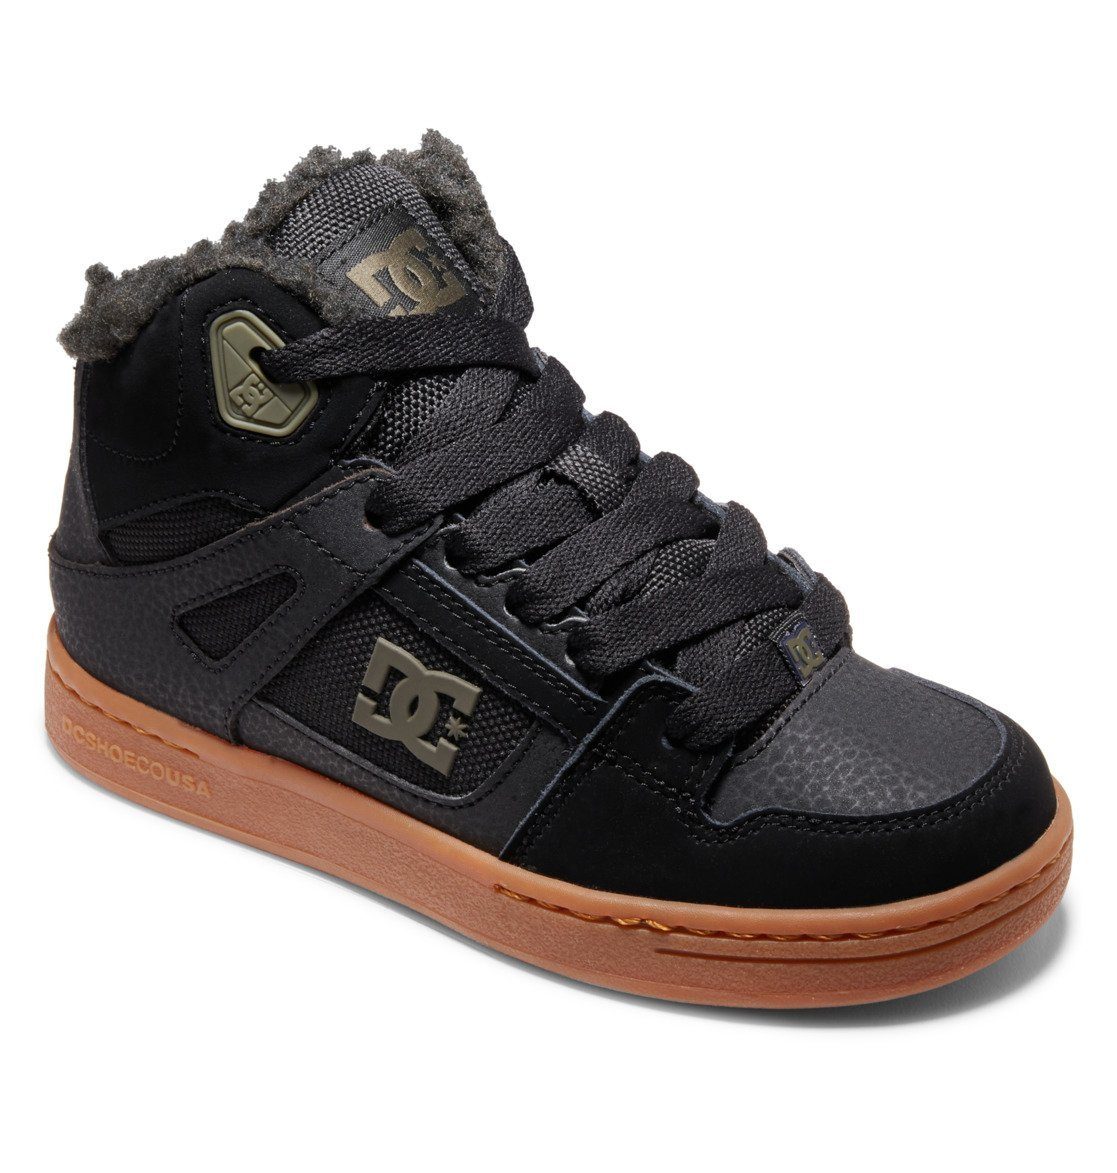 Kinder Teens (Gr. 128 - 182) DC Shoes Pure High WNT Winterboots